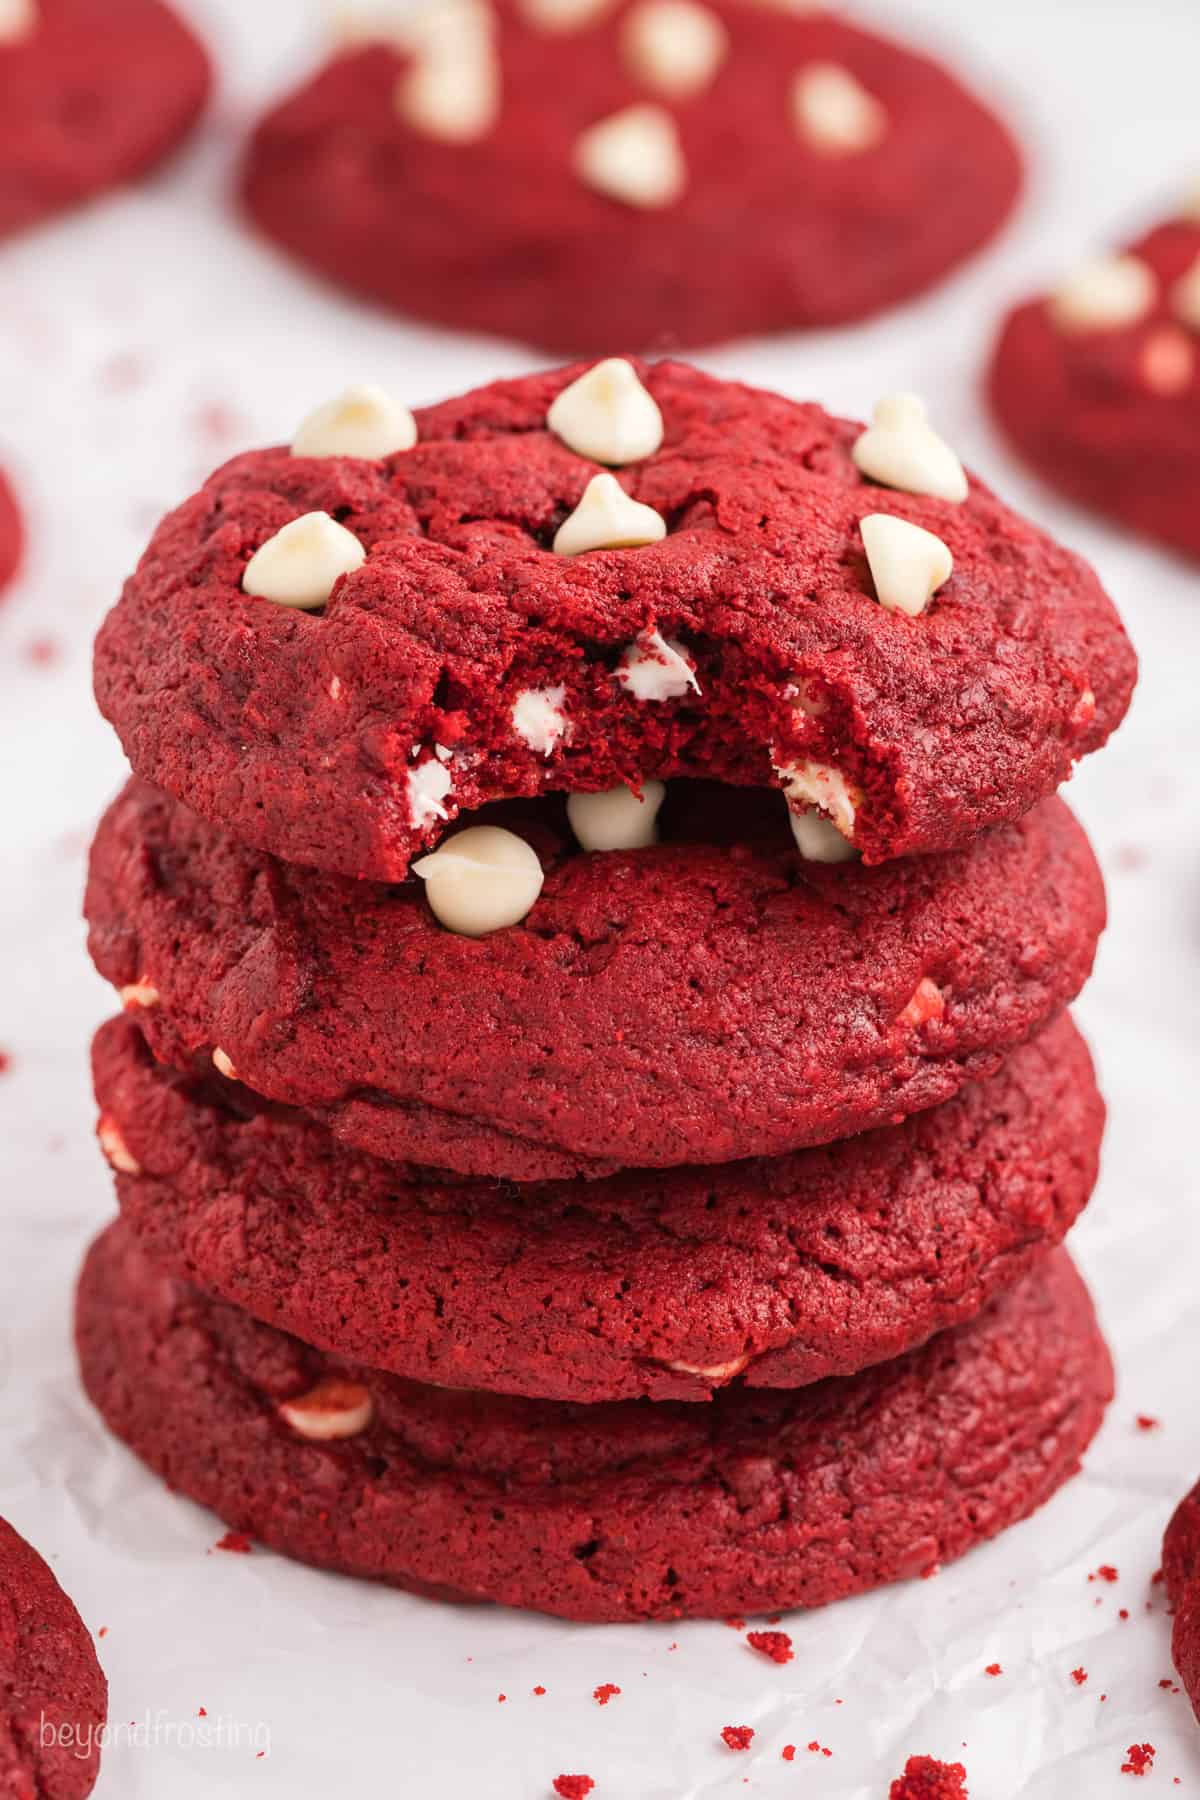 A stack of four red velvet chocolate chip cookies with a bite missing from the top cookie, and more cookies in the background.